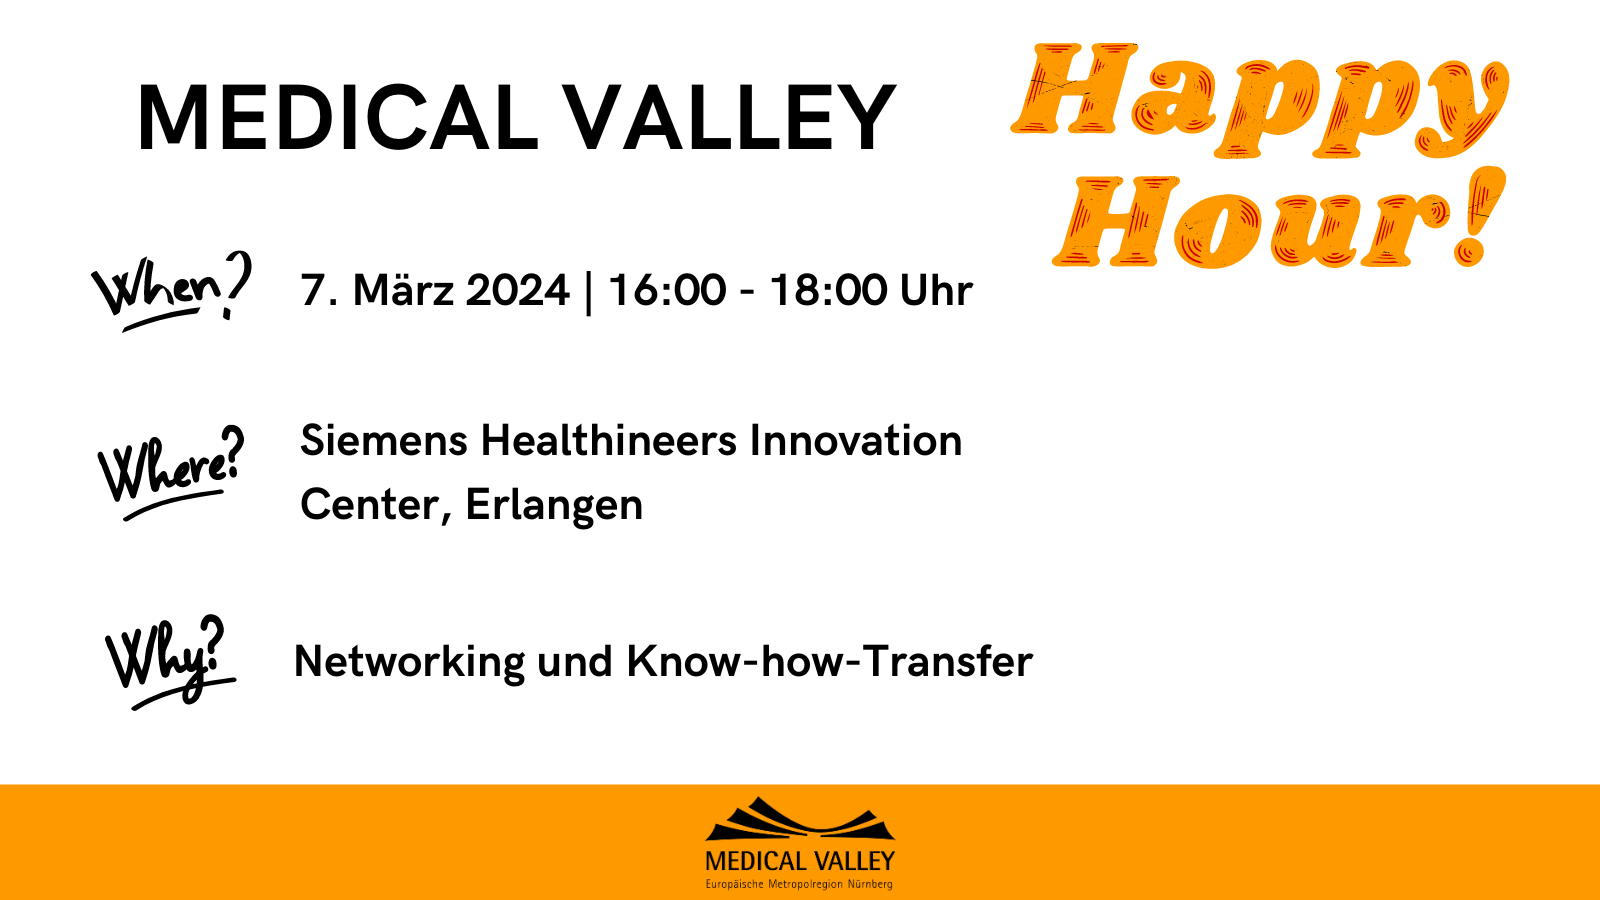 Medical Valley Happy Hour